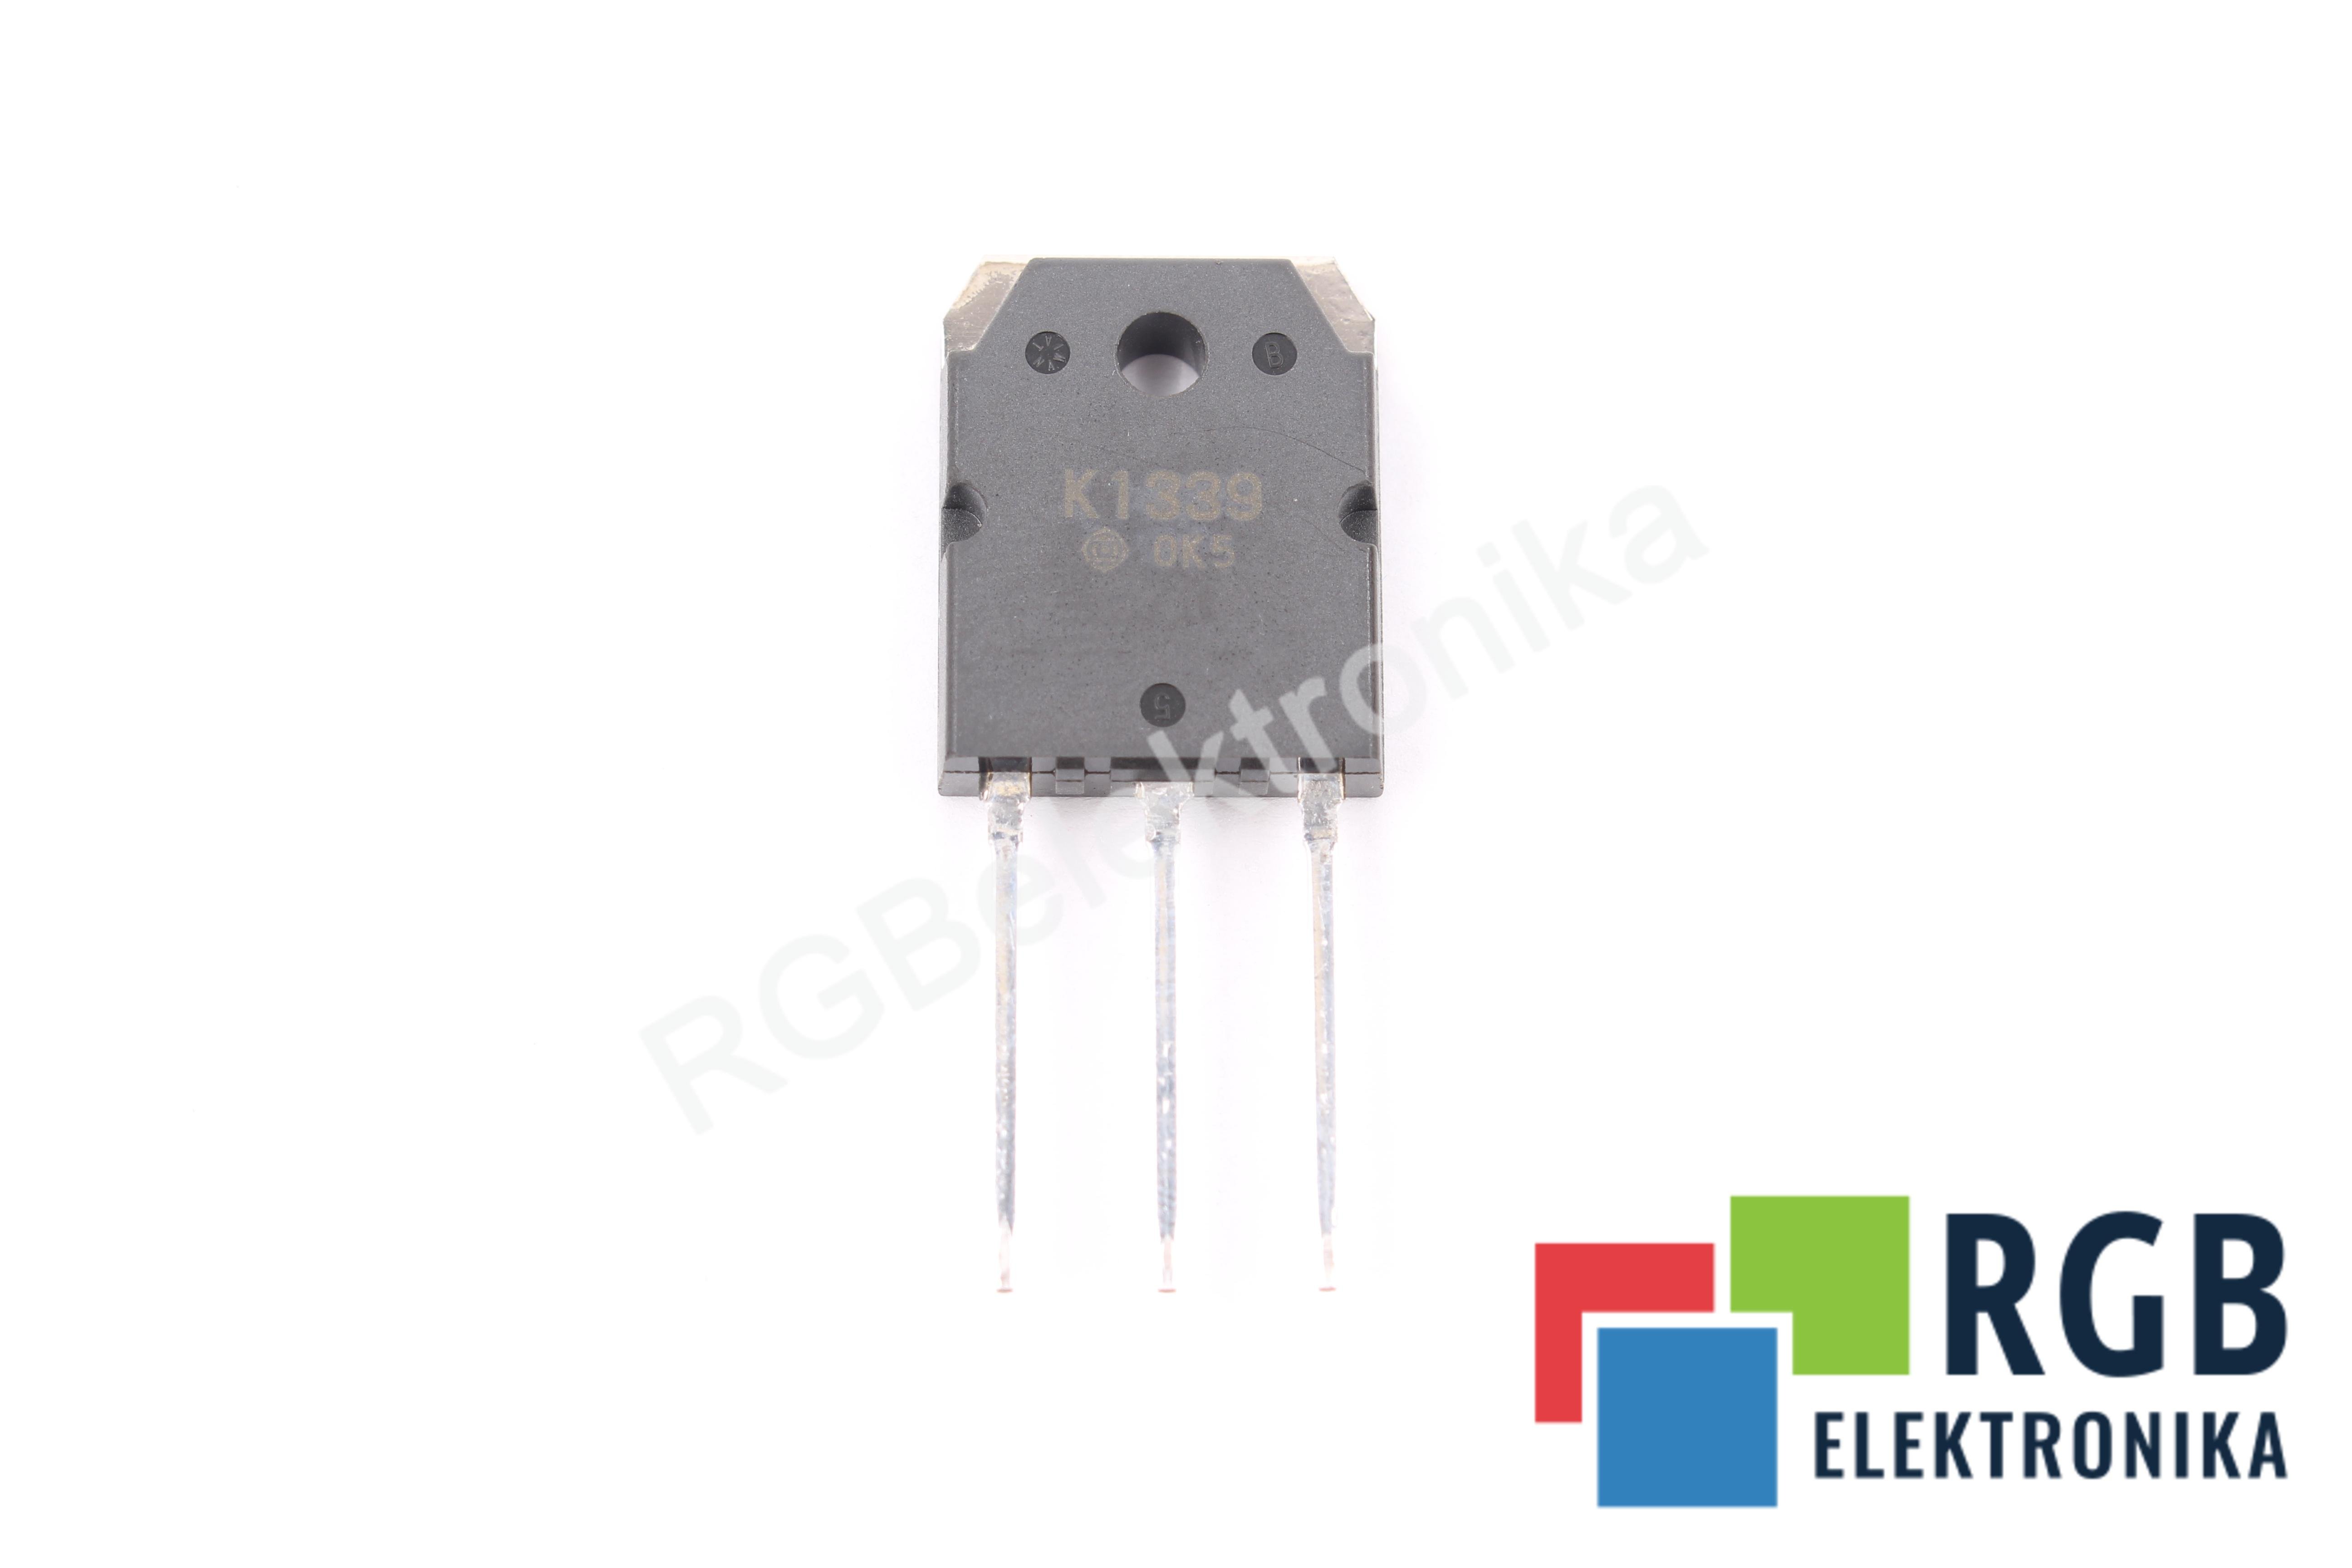 NOWY TRANZYSTOR MOCY MOSFET 2SK1339 3A 900V TO-3P THT HITACHI